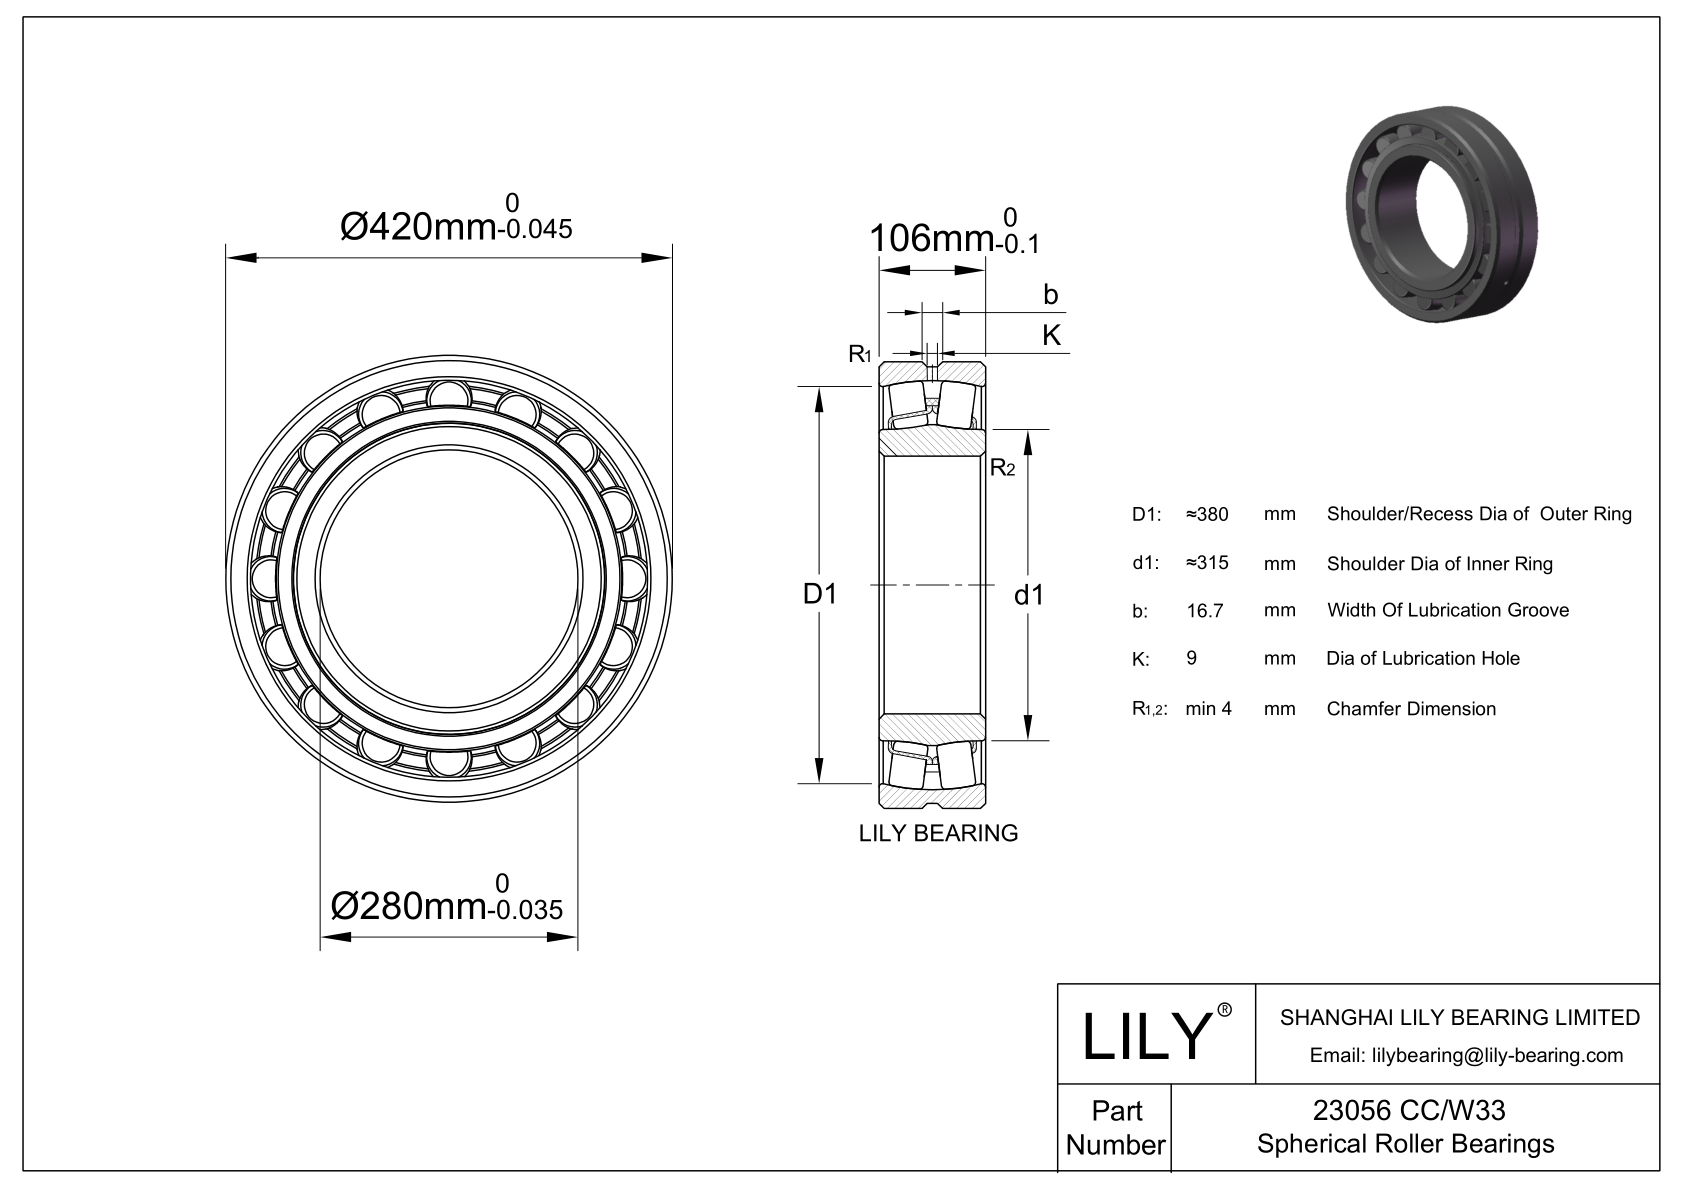 23056 CC/W33 Double Row Spherical Roller Bearing cad drawing